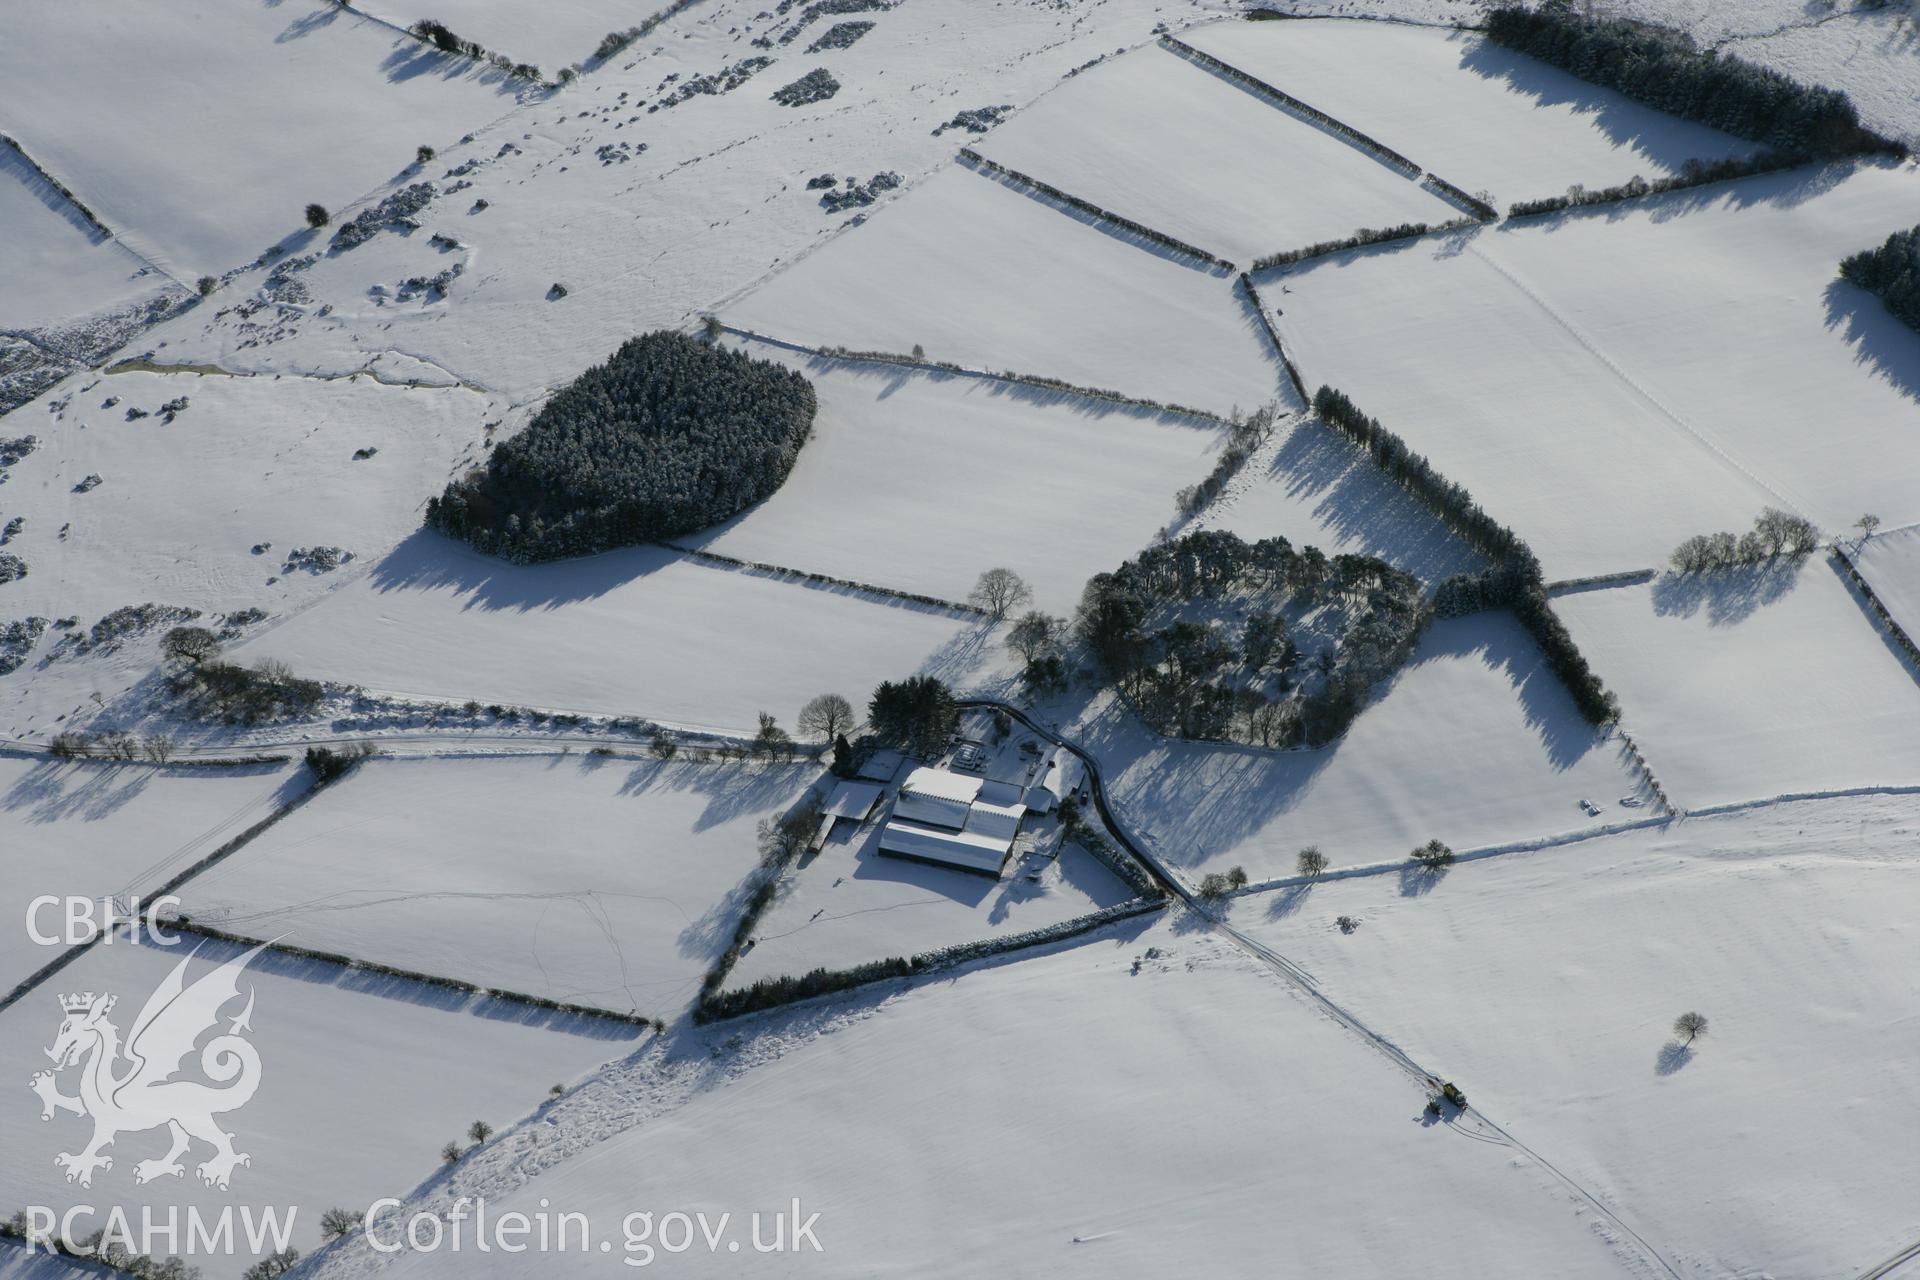 RCAHMW colour oblique photograph of Llanilltyd earthworks. Taken by Toby Driver on 06/02/2009.